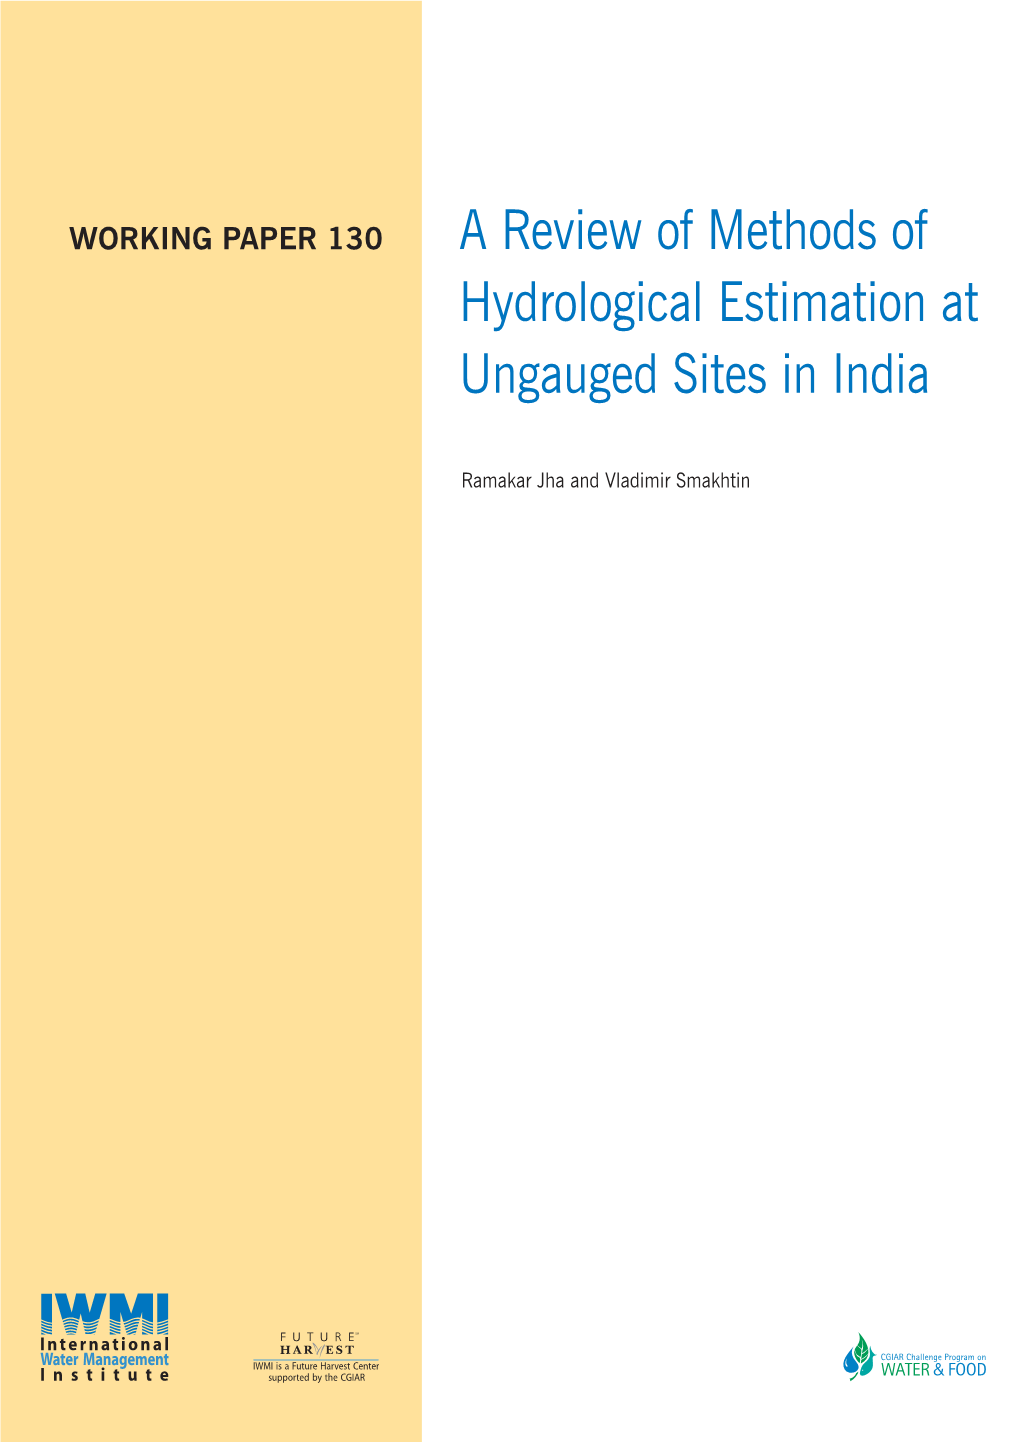 A Review of Methods of Hydrological Estimation at Ungauged Sites in India. Colombo, Sri Lanka: International Water Management Institute